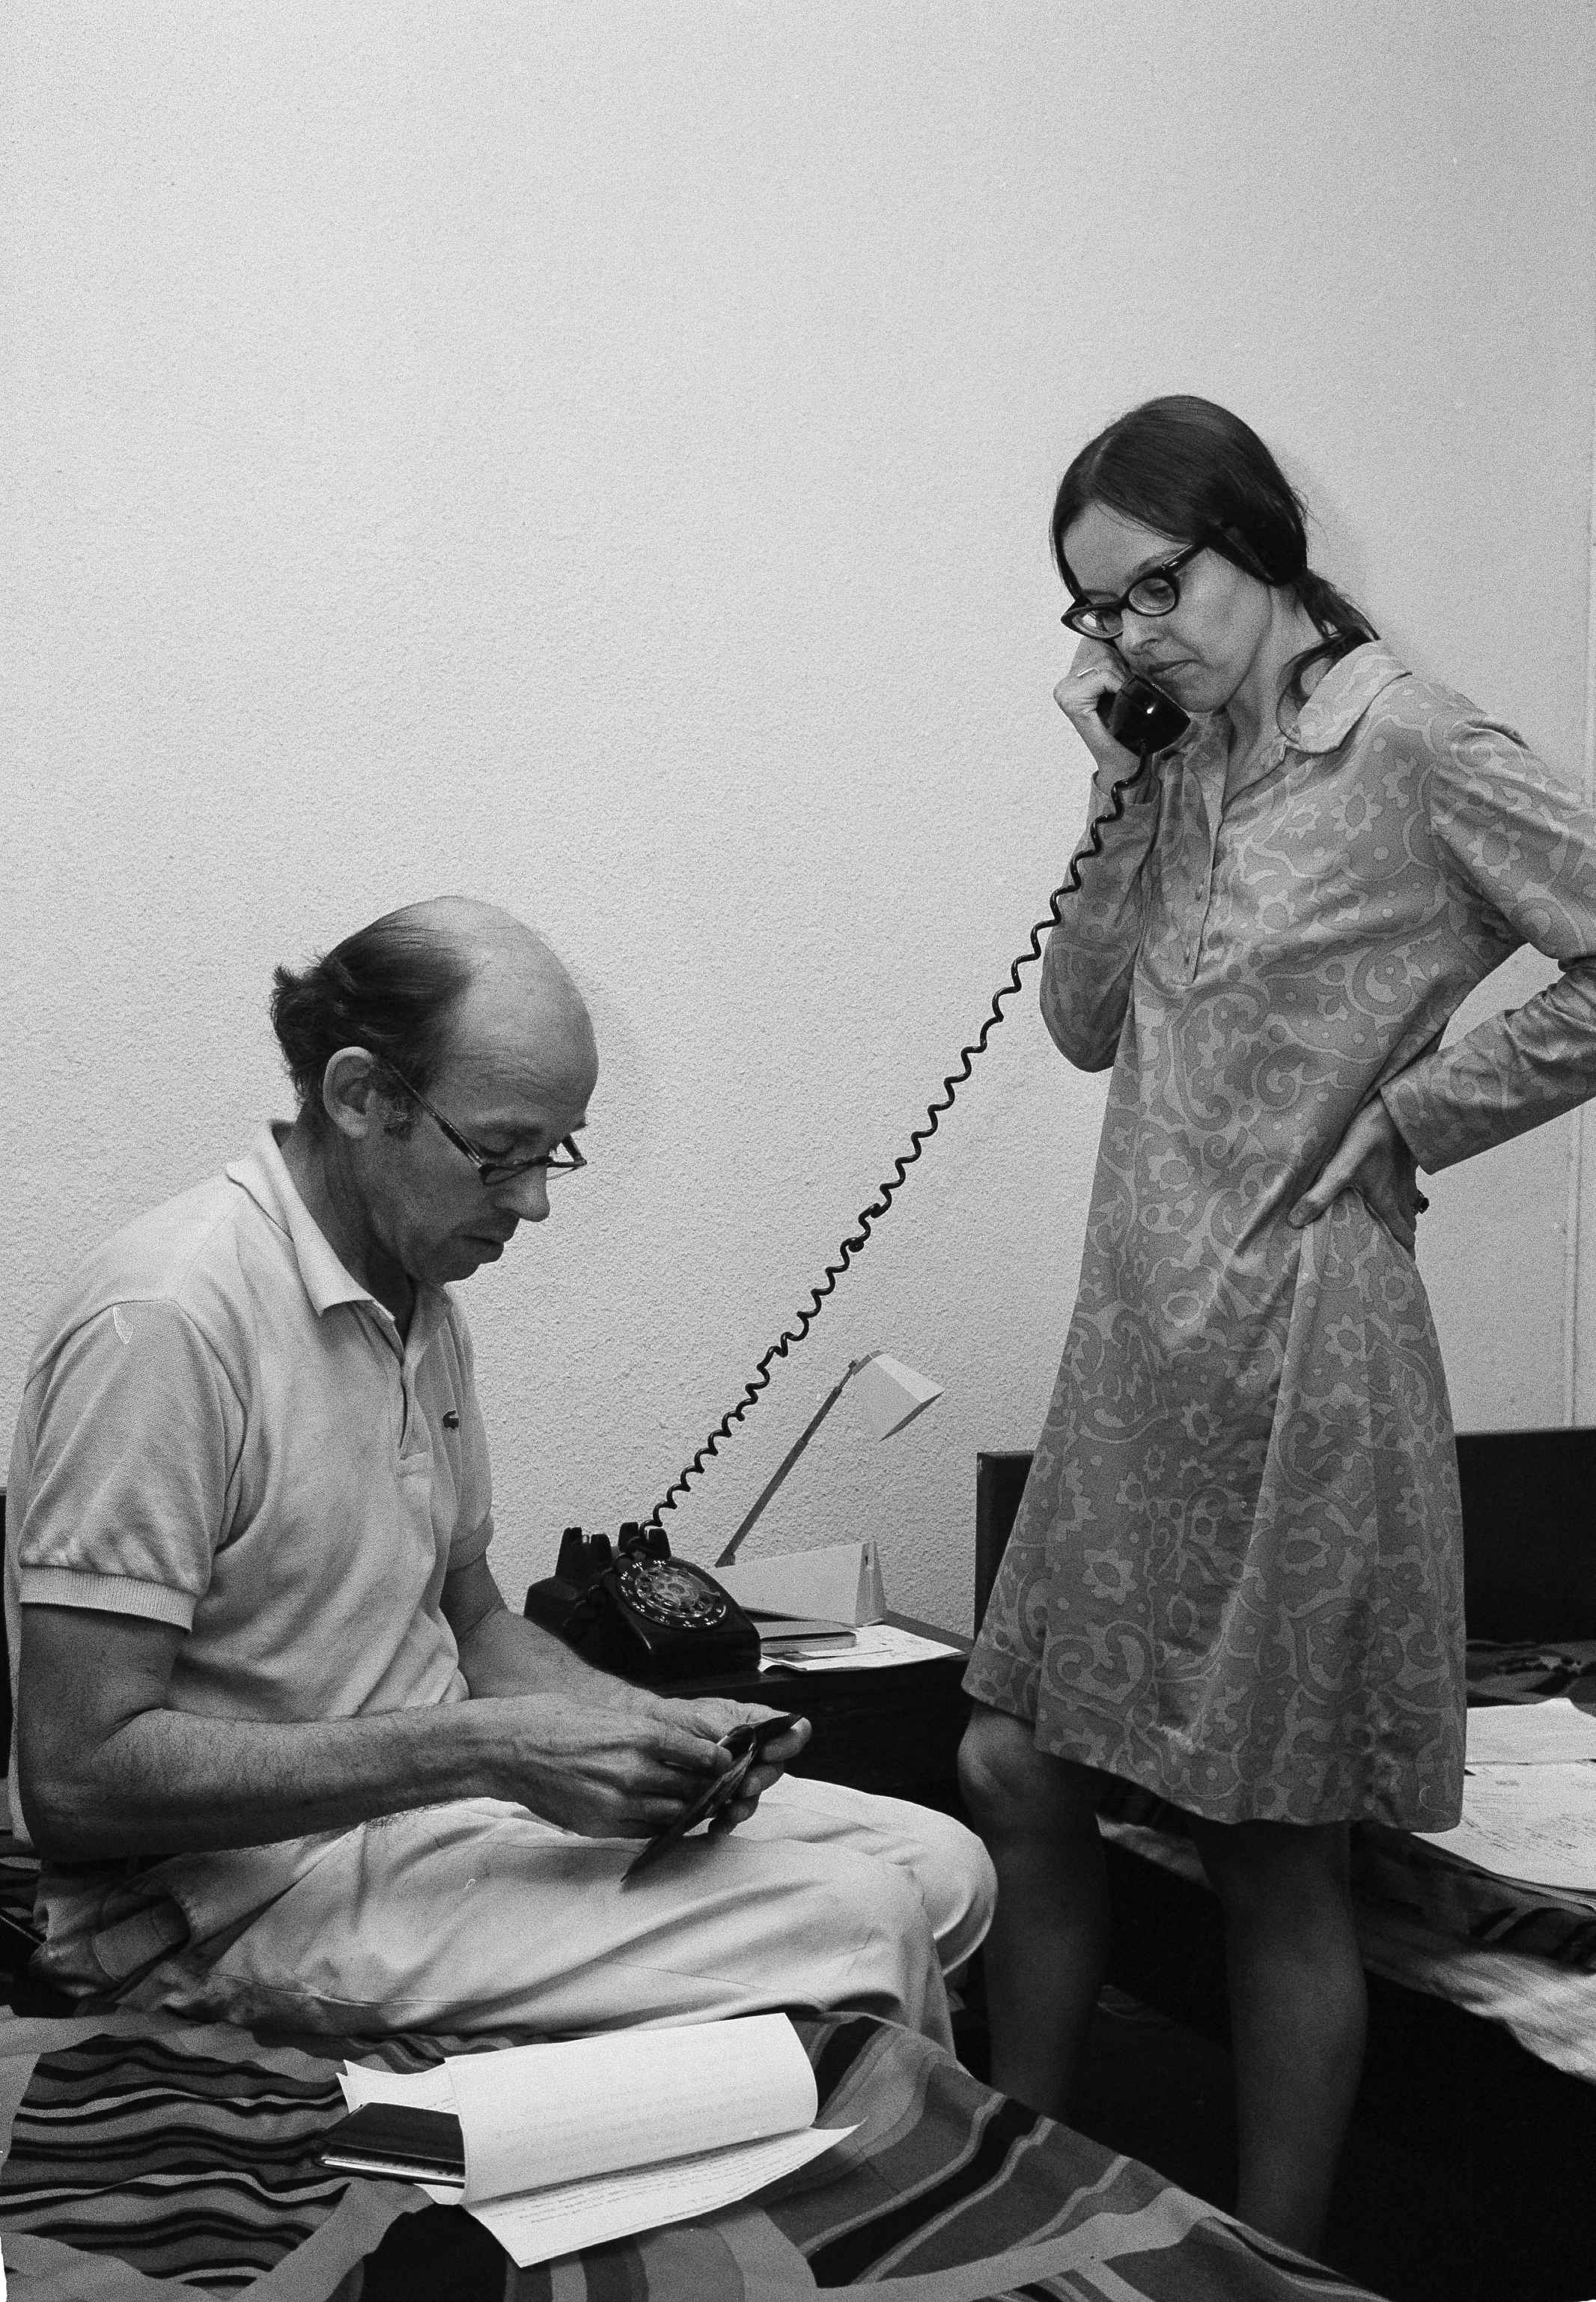 Richard B. Dudman of the St. Louis Post-Dispatch and Elizabeth Pond of the Christian Science Monitor pictured in Saigon after their release by the Viet Cong in Cambodia, June 16, 1970